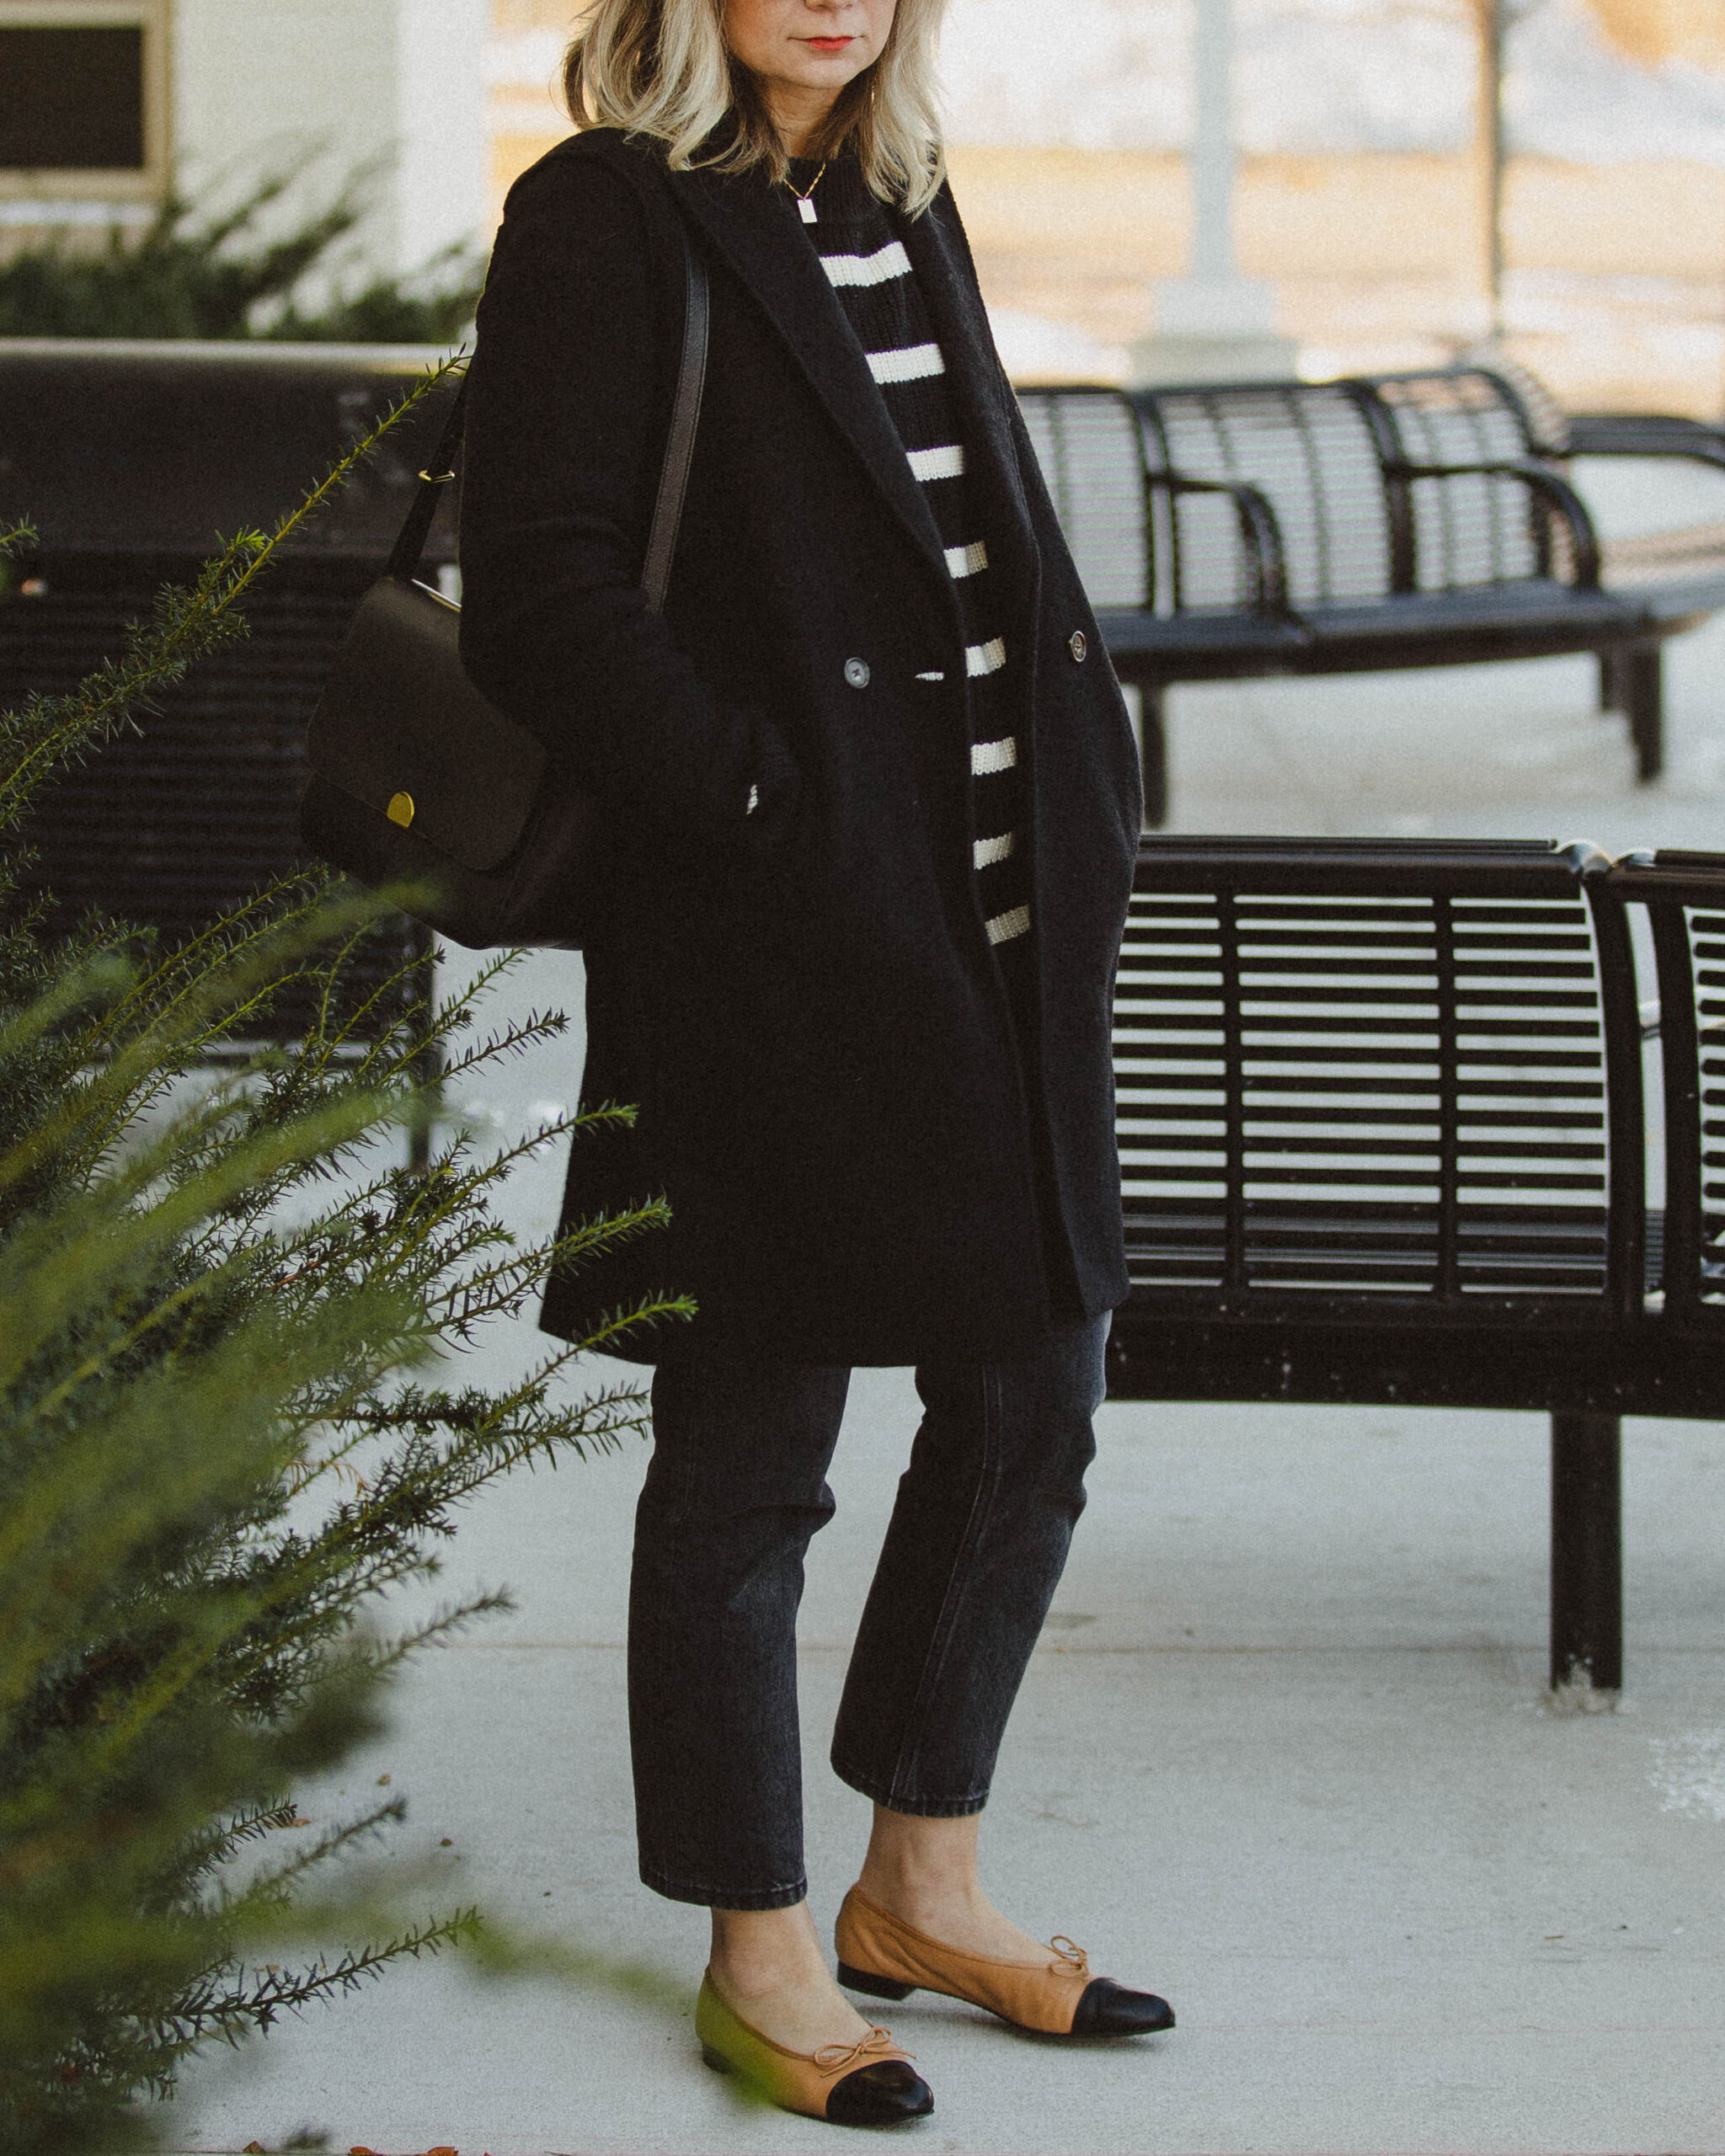 Classic Stripes: November 5, 2020 Outfit